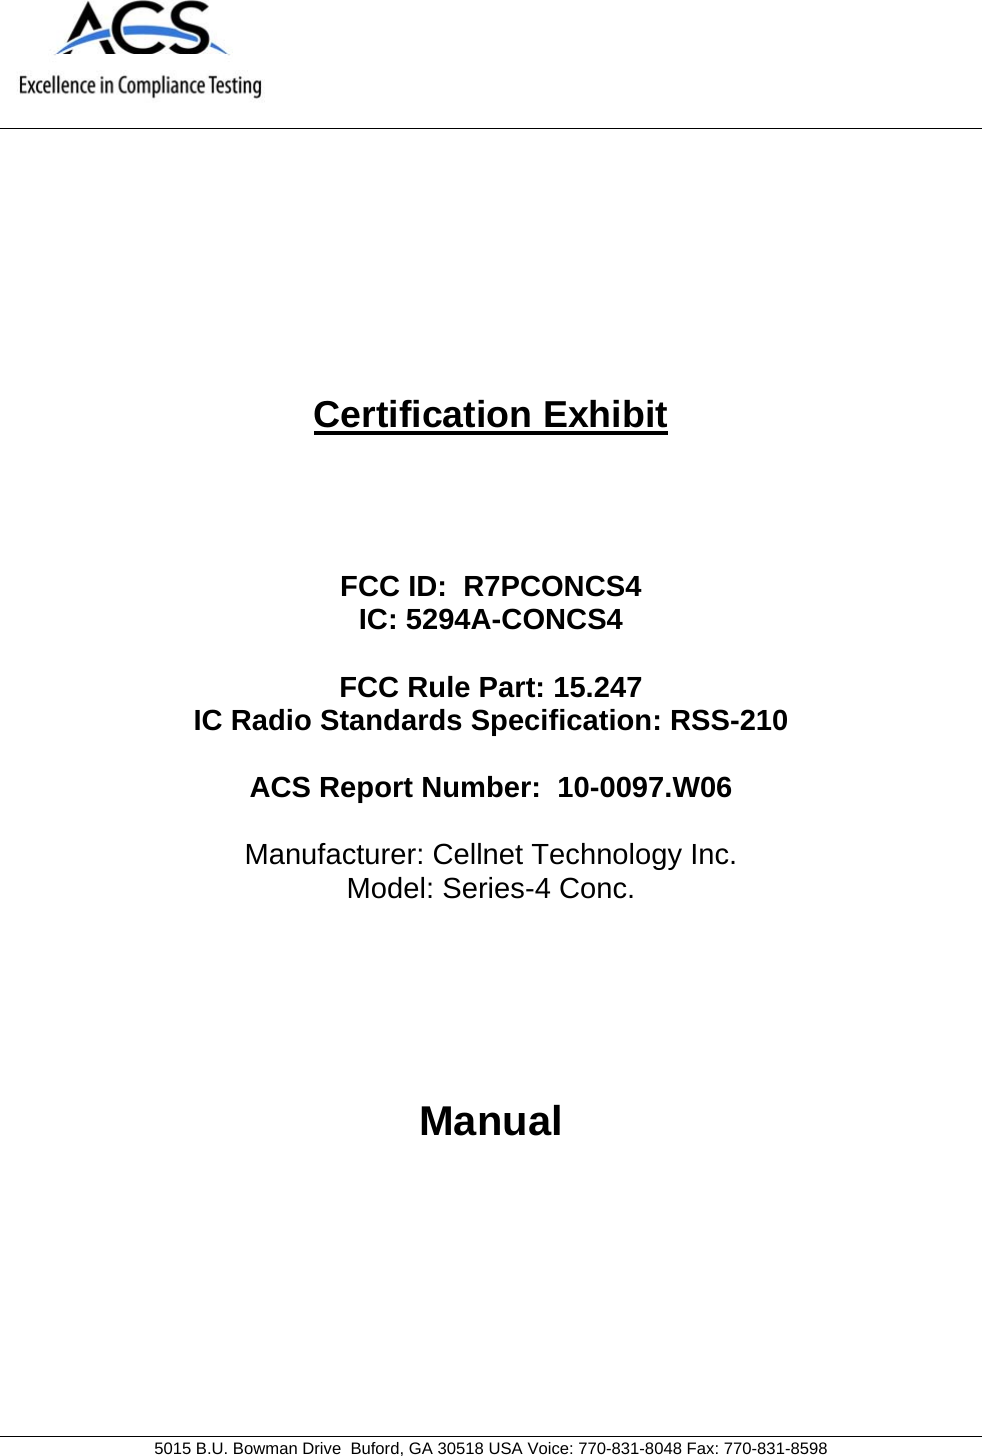     5015 B.U. Bowman Drive  Buford, GA 30518 USA Voice: 770-831-8048 Fax: 770-831-8598   Certification Exhibit     FCC ID:  R7PCONCS4 IC: 5294A-CONCS4  FCC Rule Part: 15.247 IC Radio Standards Specification: RSS-210  ACS Report Number:  10-0097.W06  Manufacturer: Cellnet Technology Inc. Model: Series-4 Conc.     Manual  